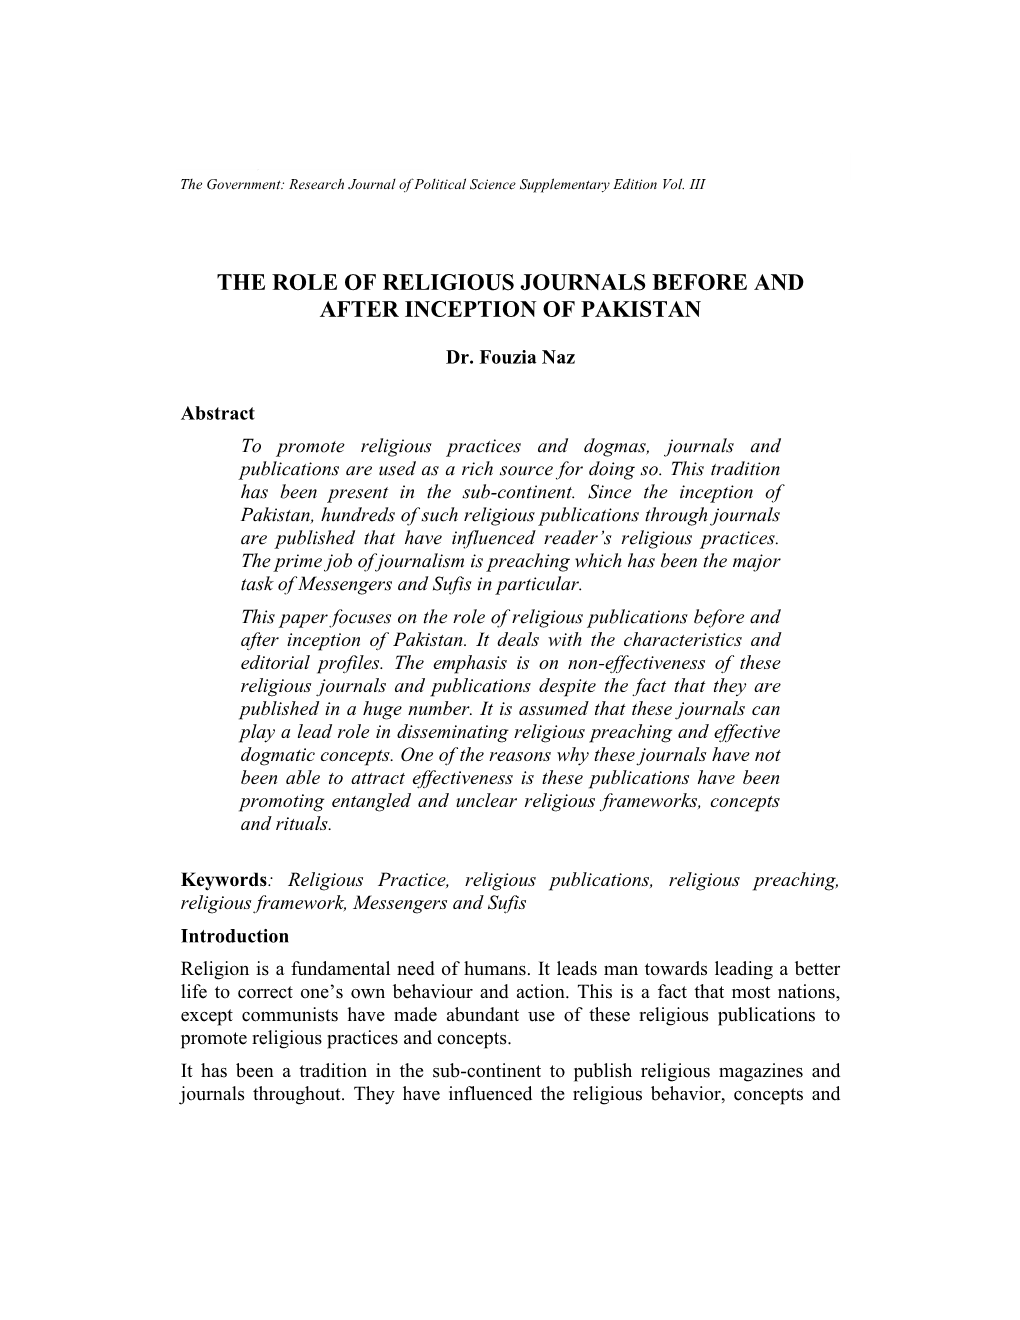 The Role of Religious Journals Before and After Inception of Pakistan